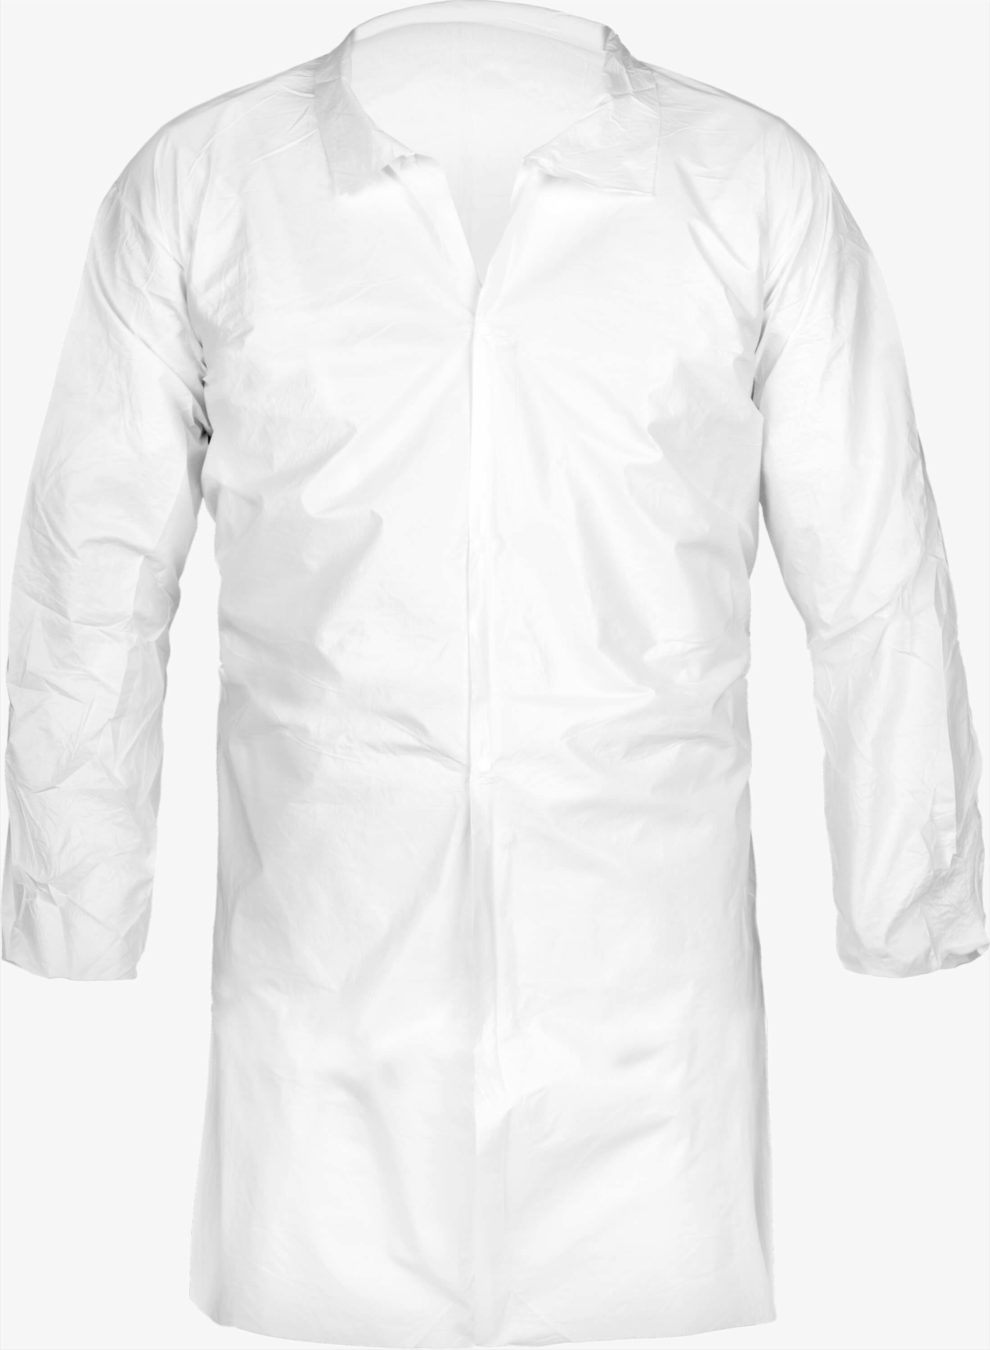 MicroMax® NS White Long Sleeve Lab Coat - Disposable Clothing